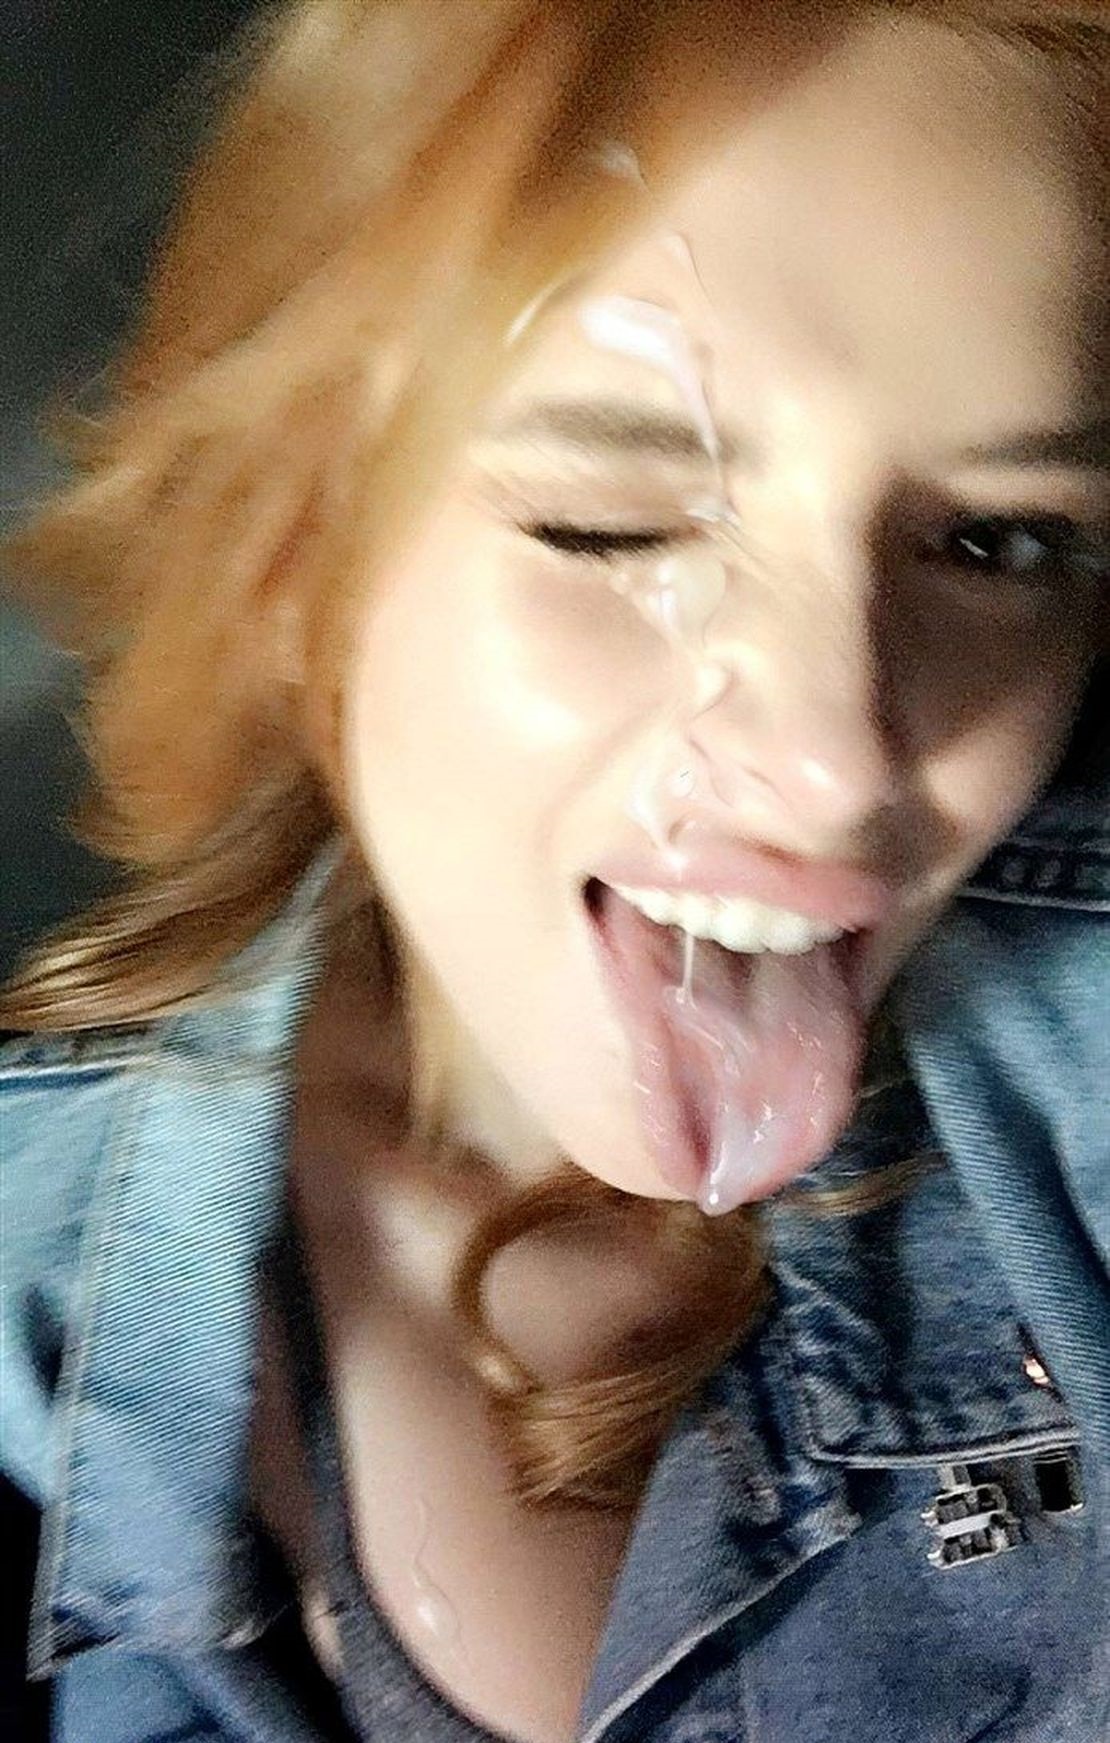 Bella Thorne Cum Facial and Nude Photos and Video Leaked | The Fappening